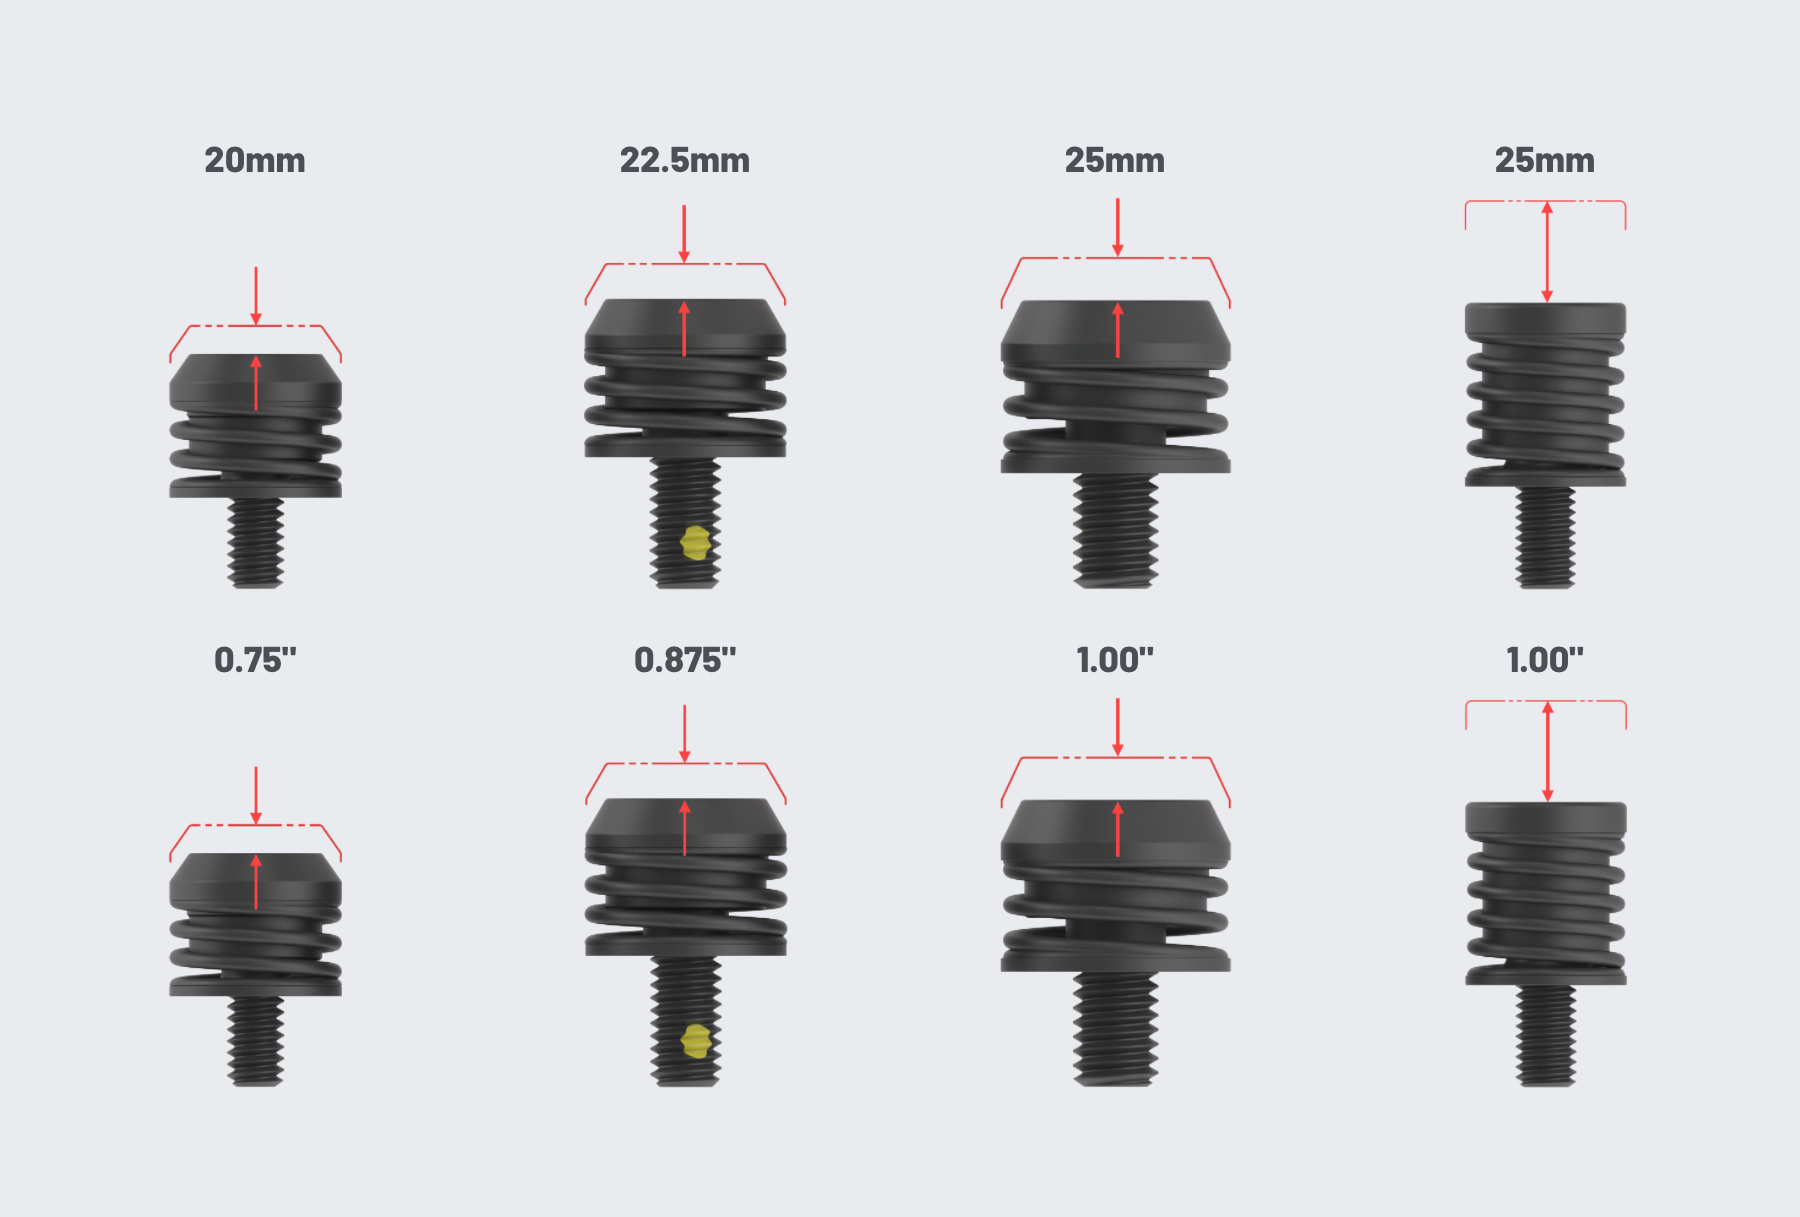 4 different black ejector sizes with sizes labeled